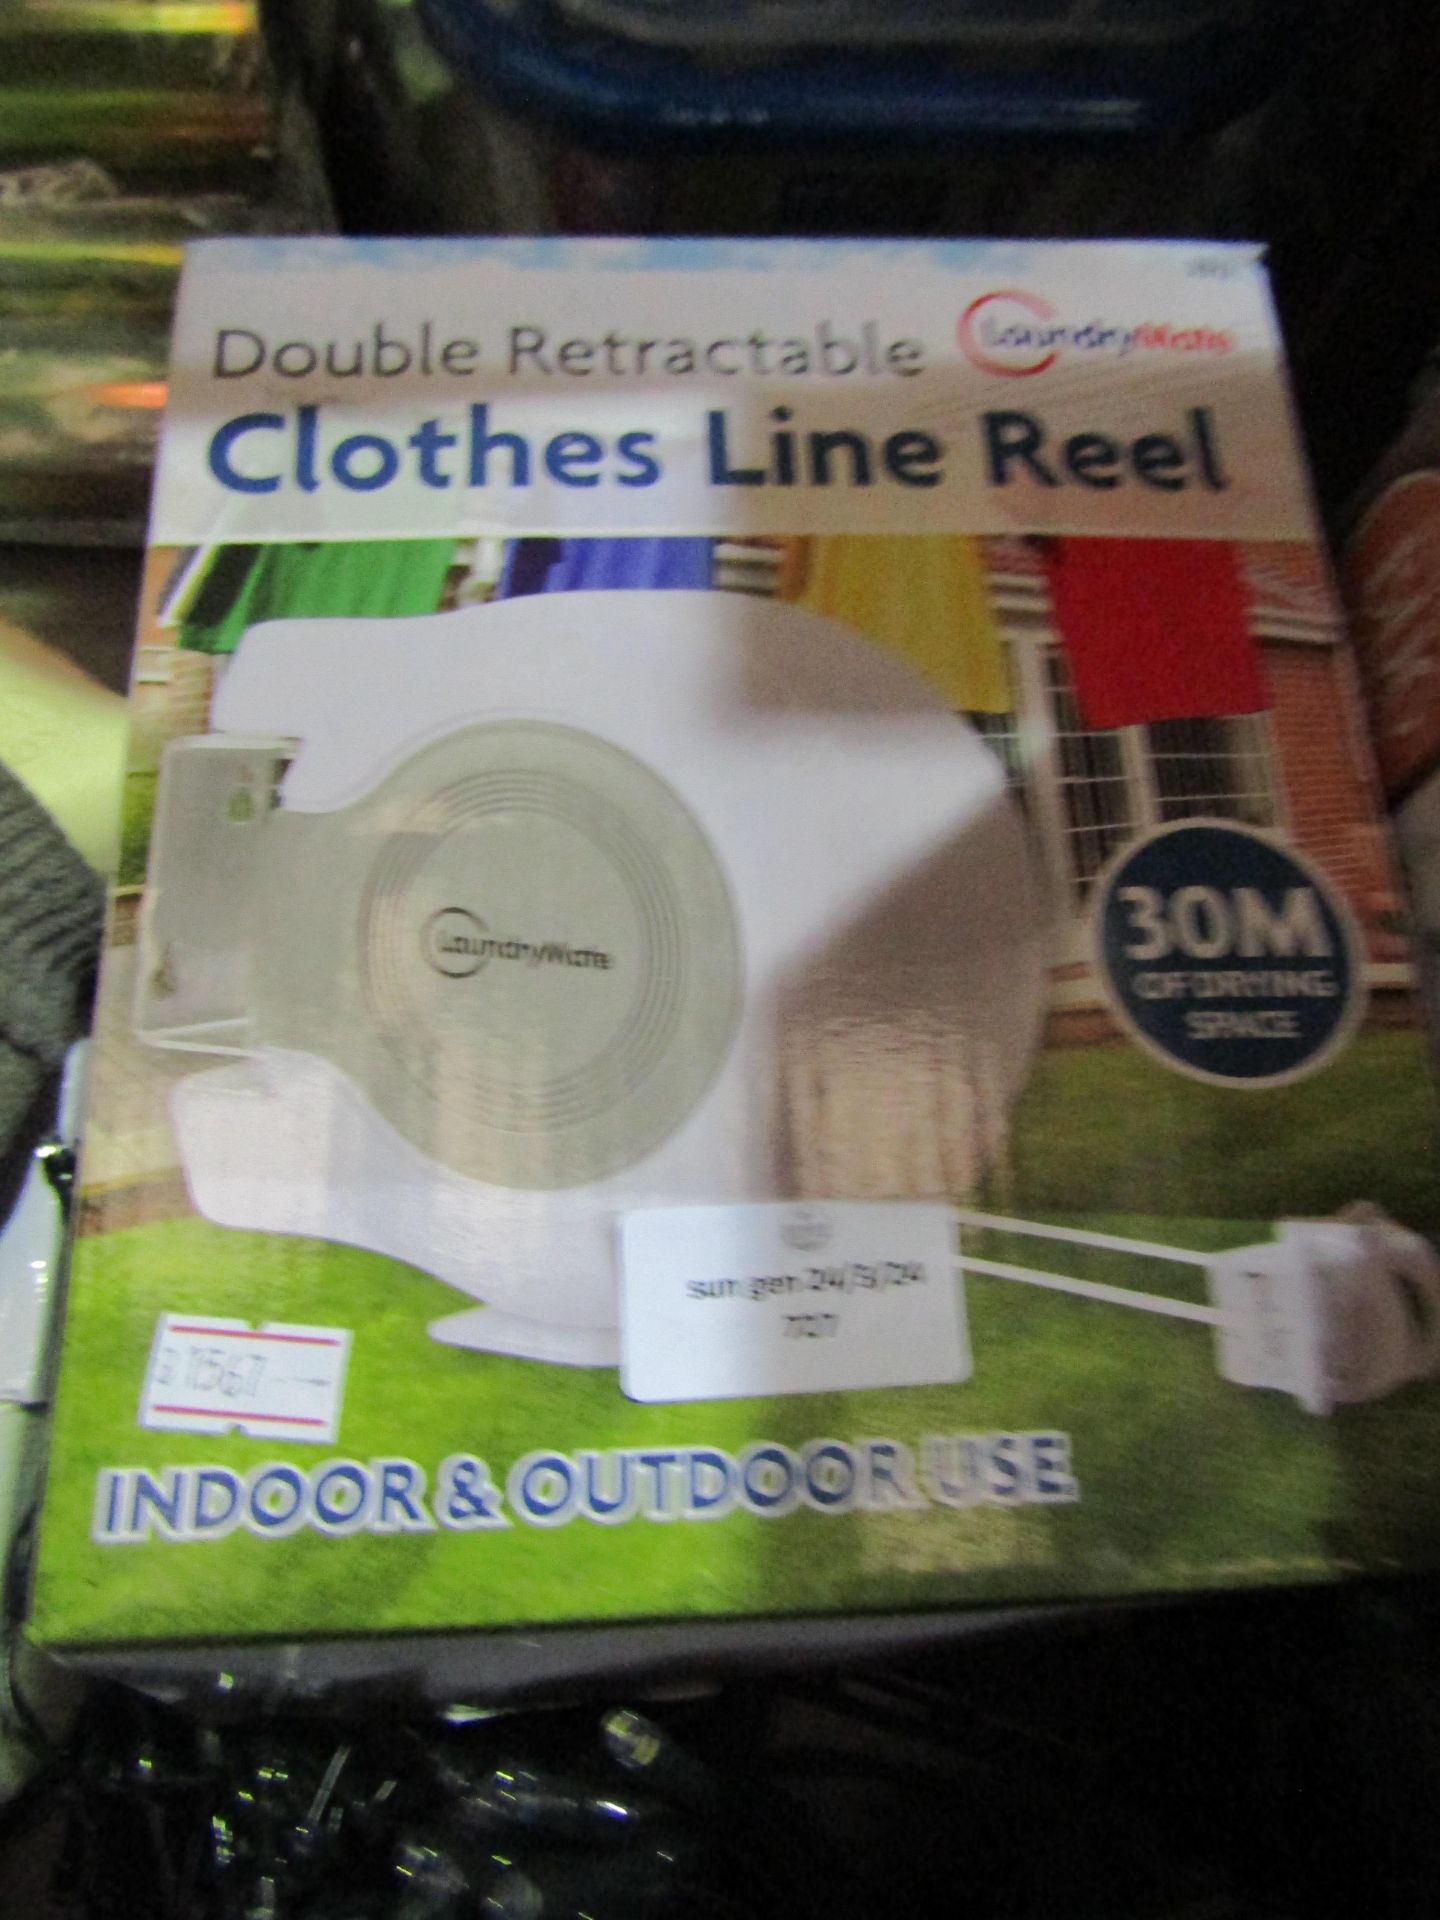 Laundrymate Double Retractable Cloths Line Reel, Unchecked & Boxed.